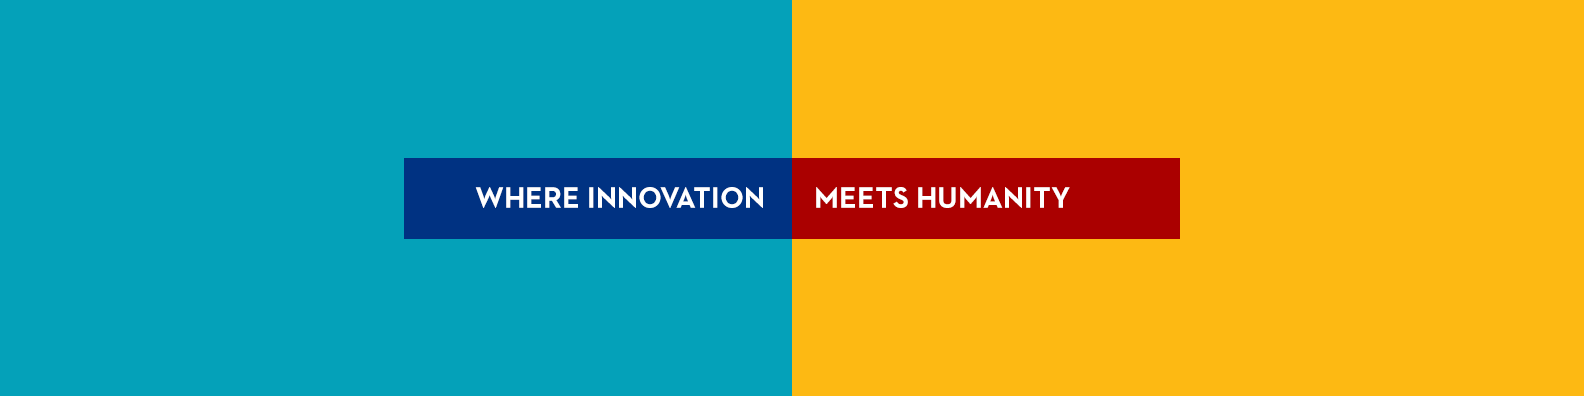 Background Image: Where Innovation Meets Humanity